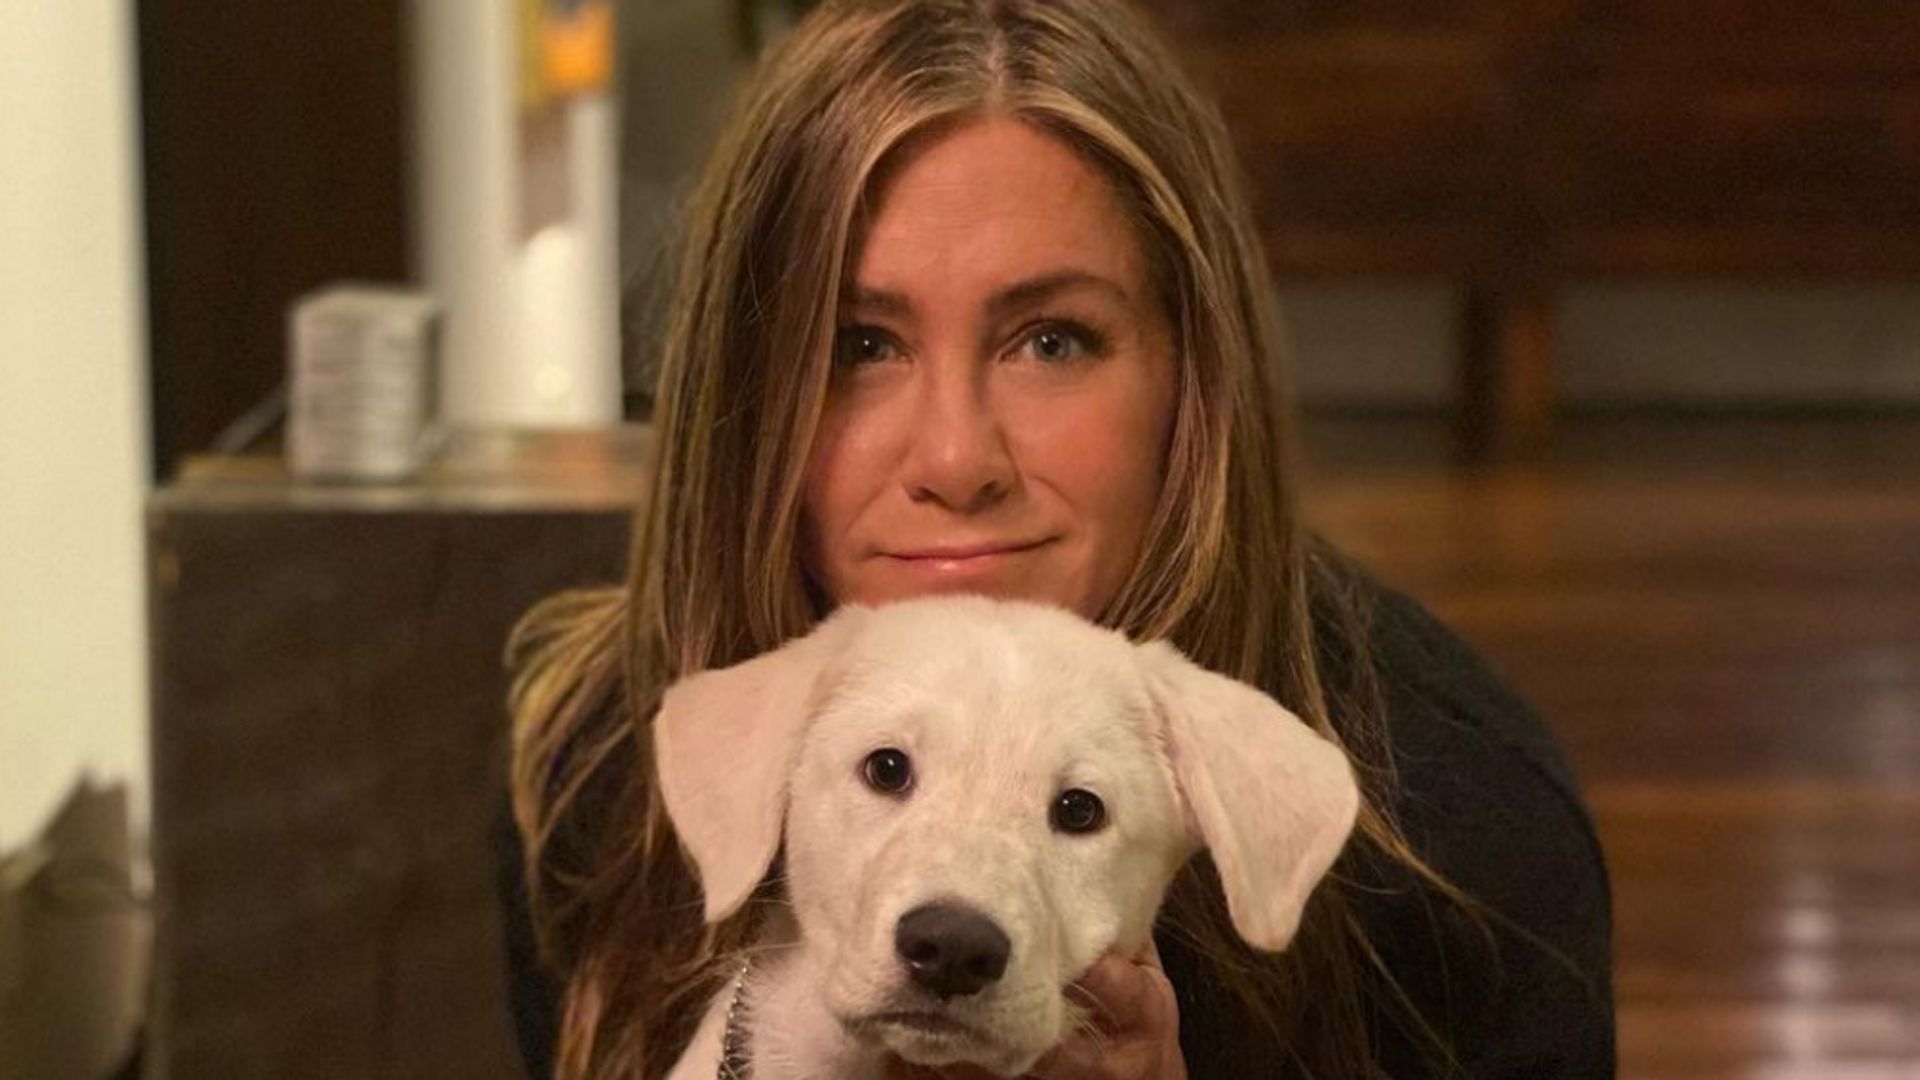 Photo posted by Jennifer Aniston on Instagram November 2020, pictured with her dog Lord Chesterfield, who she adopted in October of 2020.